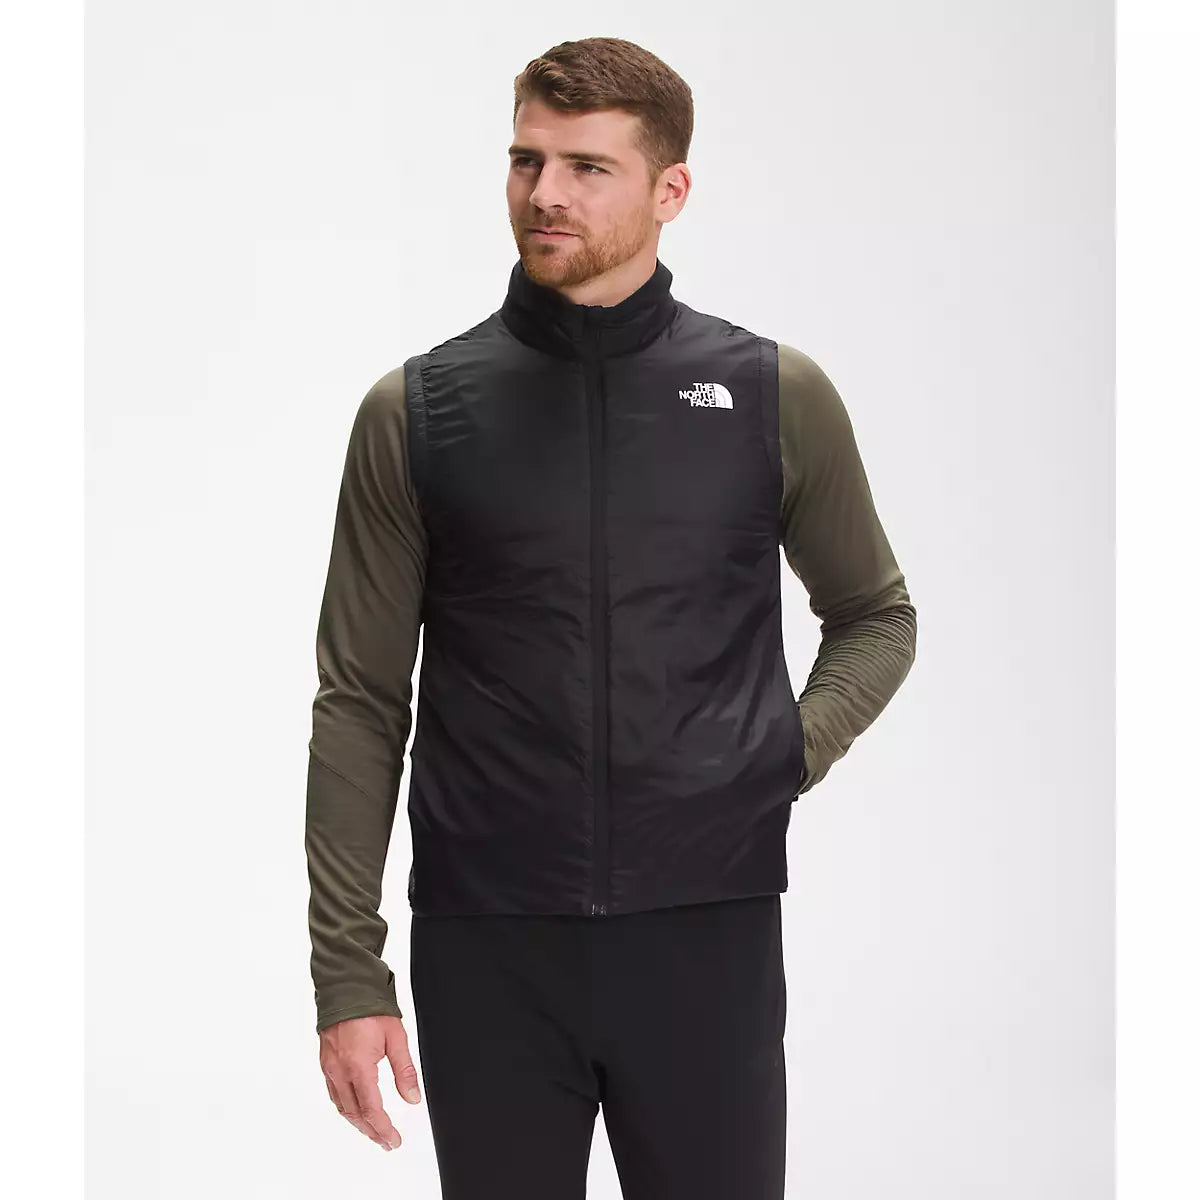 THE NORTH FACE Winter Warm Pro Jacket, Forest Fern/Dark Sage, Medium :  : Clothing, Shoes & Accessories